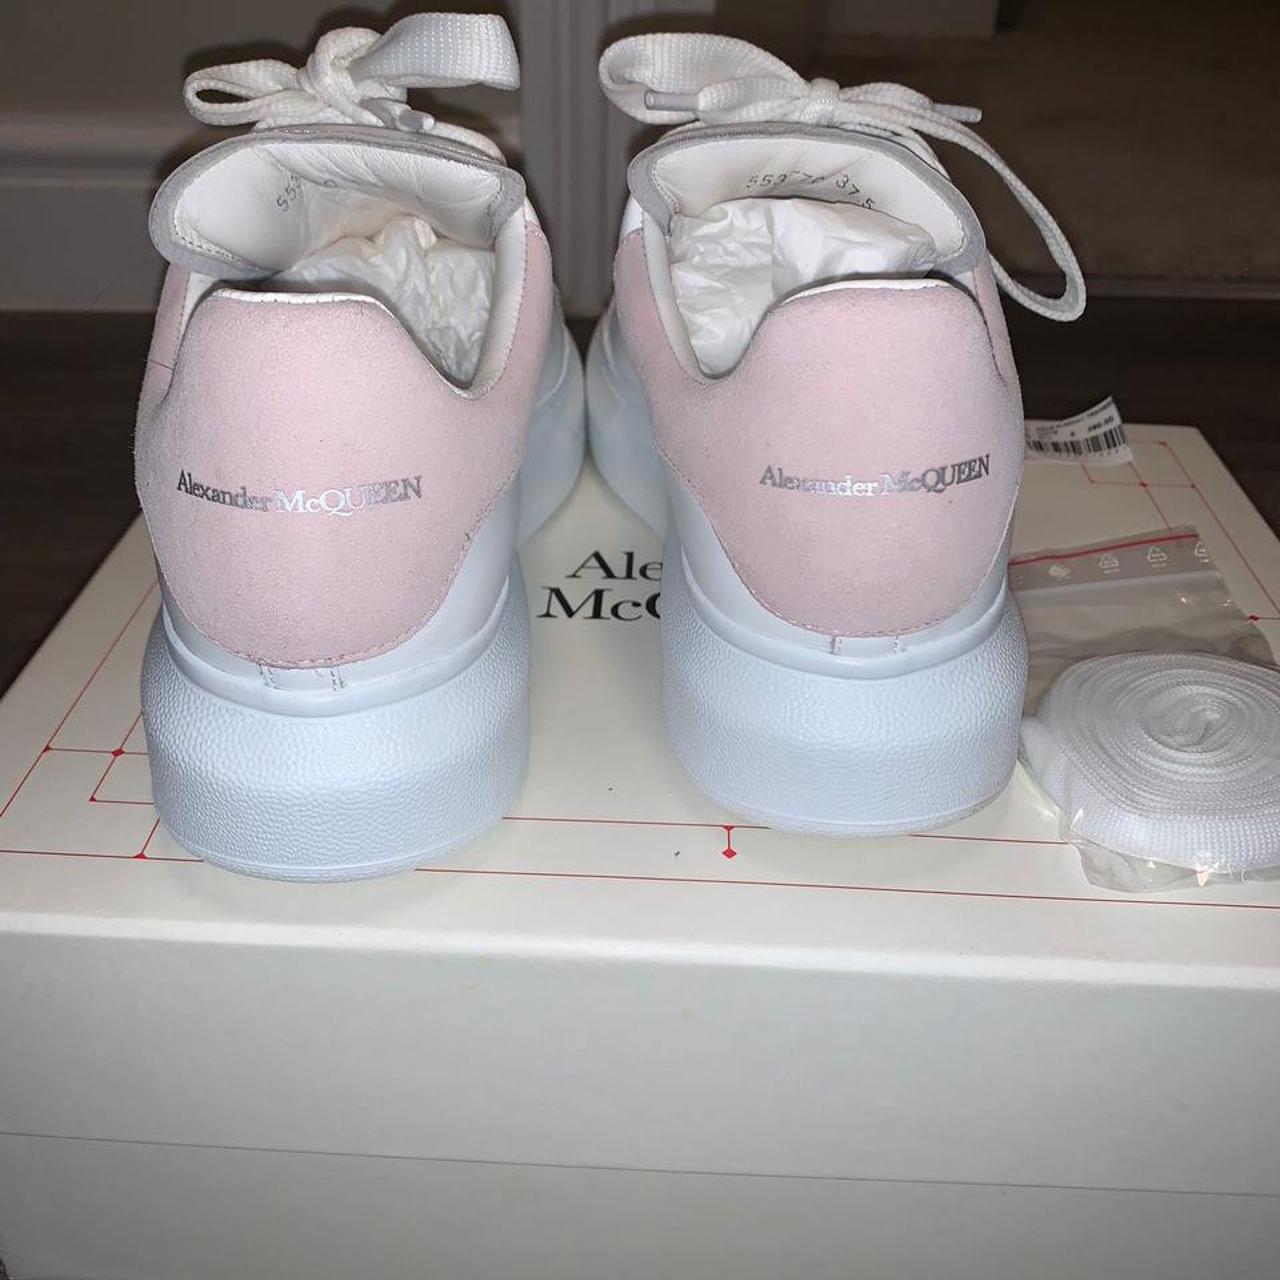 100% authentic Alexandra McQueen white and pink... - Depop